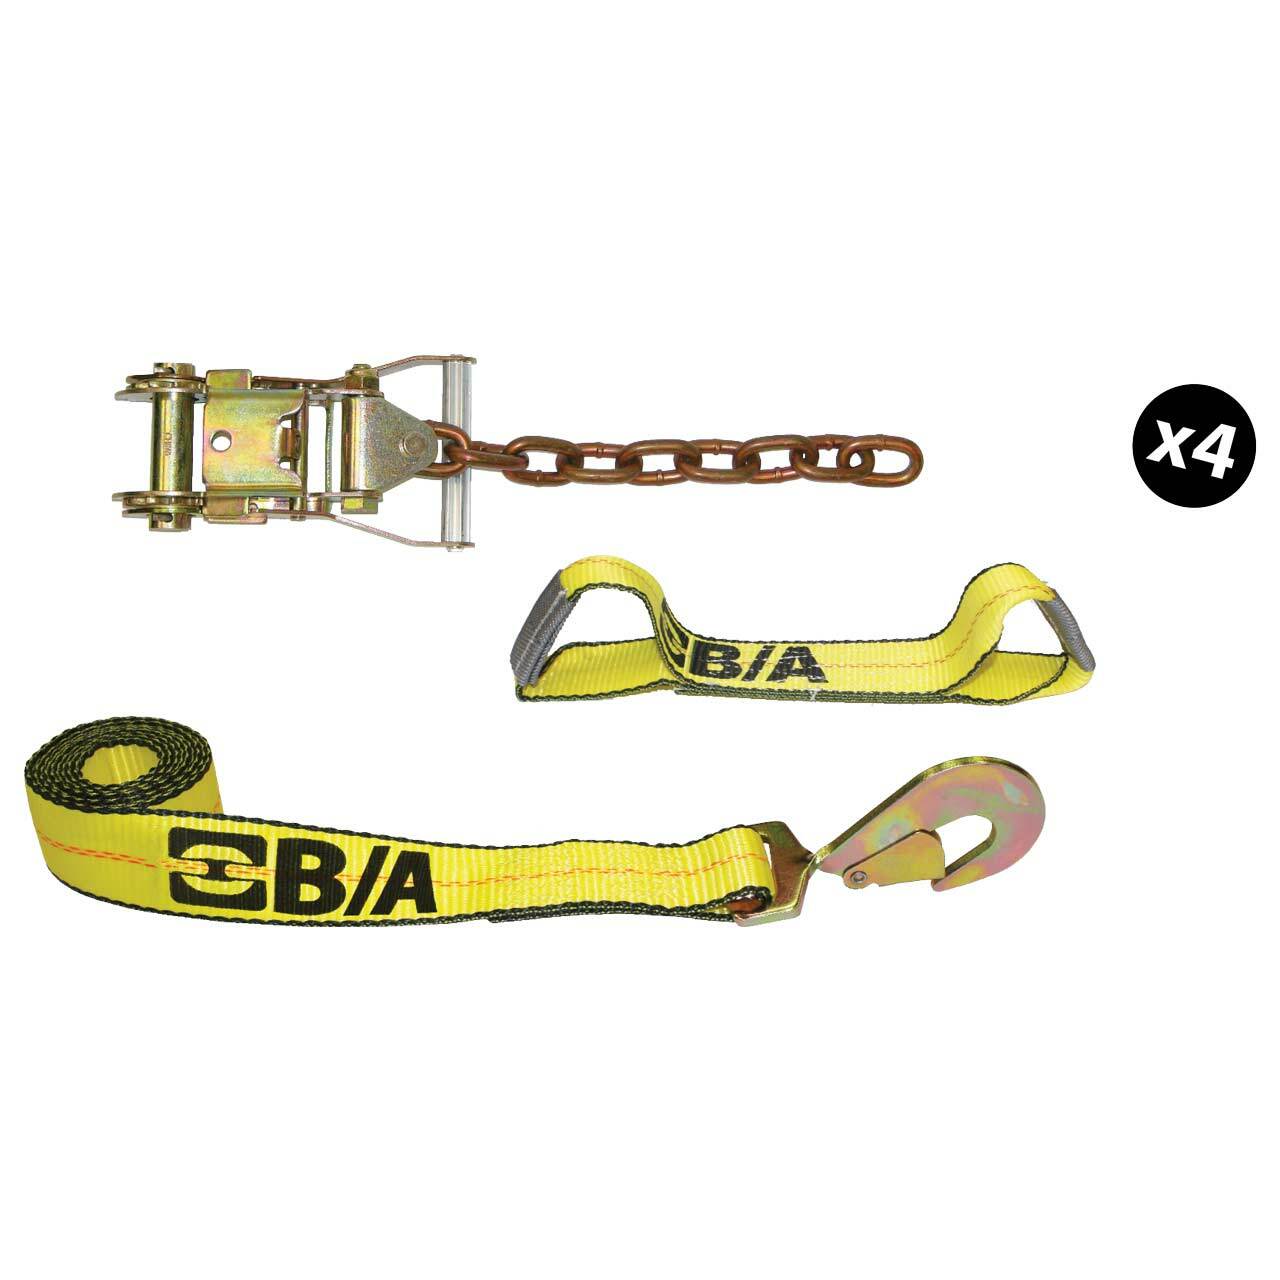 B/A Products Co. High-Quality Auto Tie-Down Strap Kits